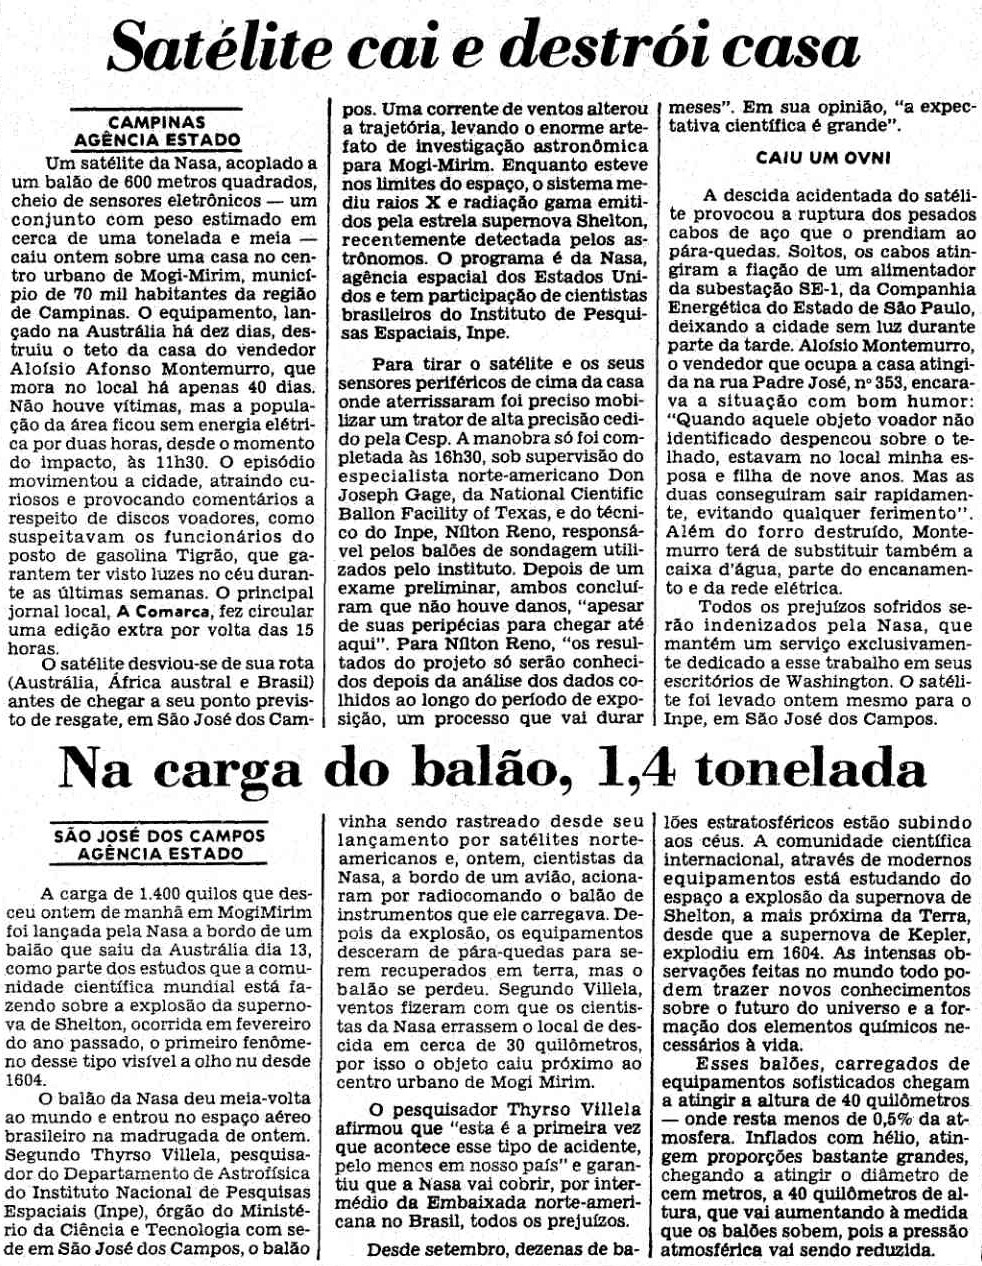 The news about the accidented landing of the Gamma Ray payload published on Febraury 26 by the Estado de Sao Paulo journal